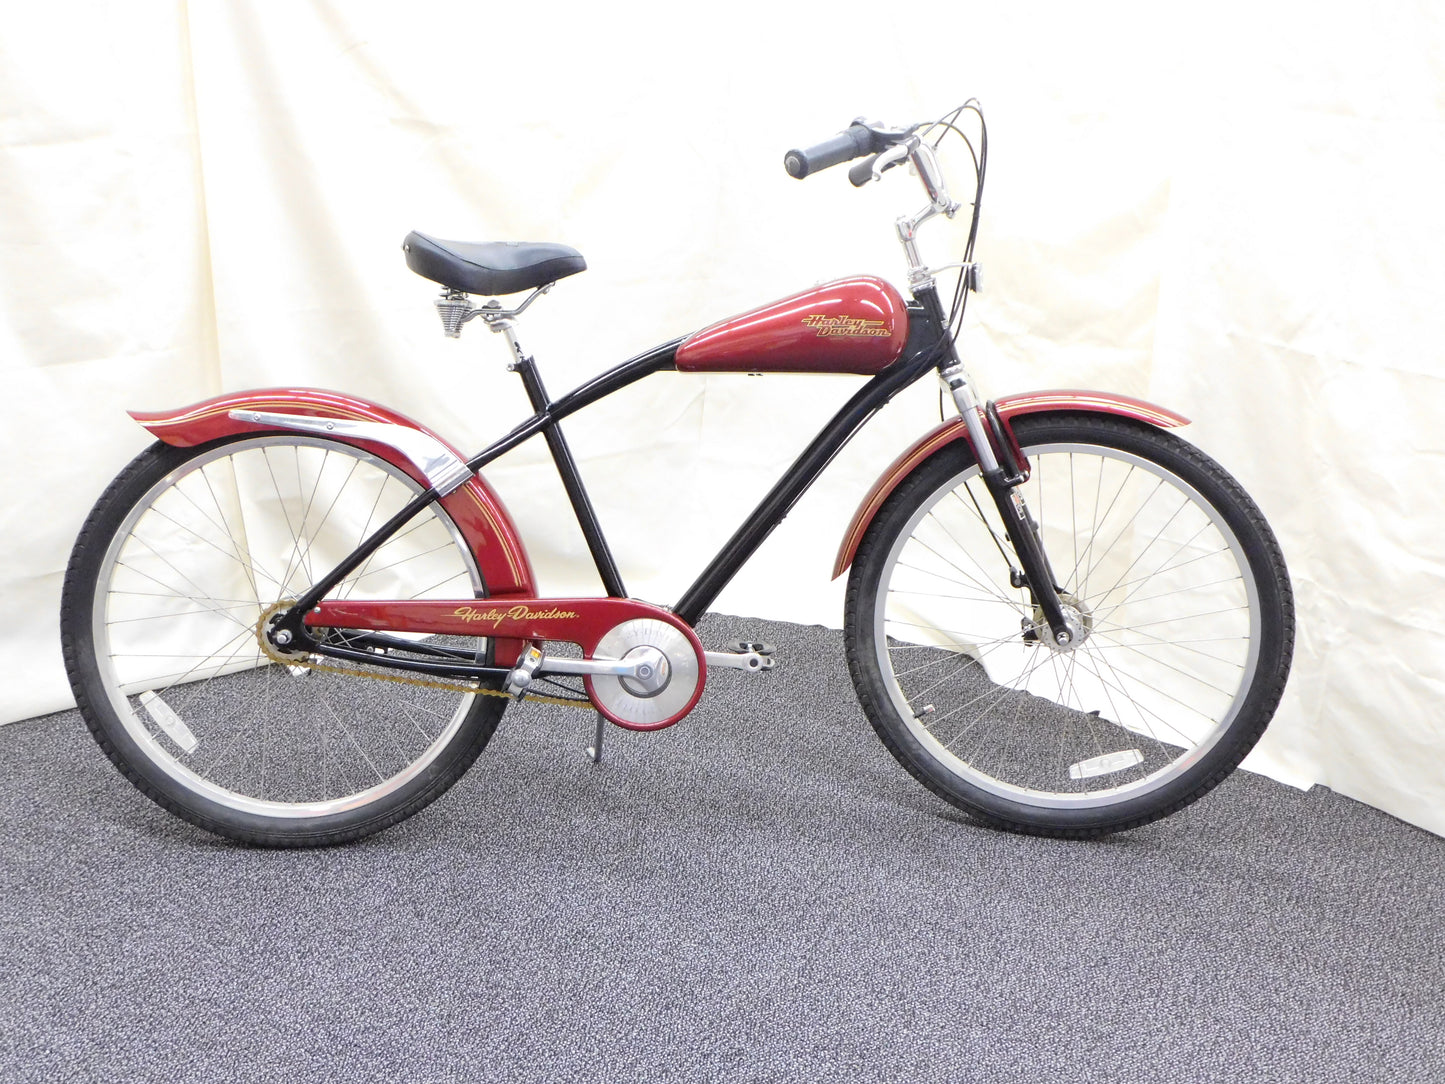 1998 Harley-Davidson Limited Edition Velo Glide Bicycle